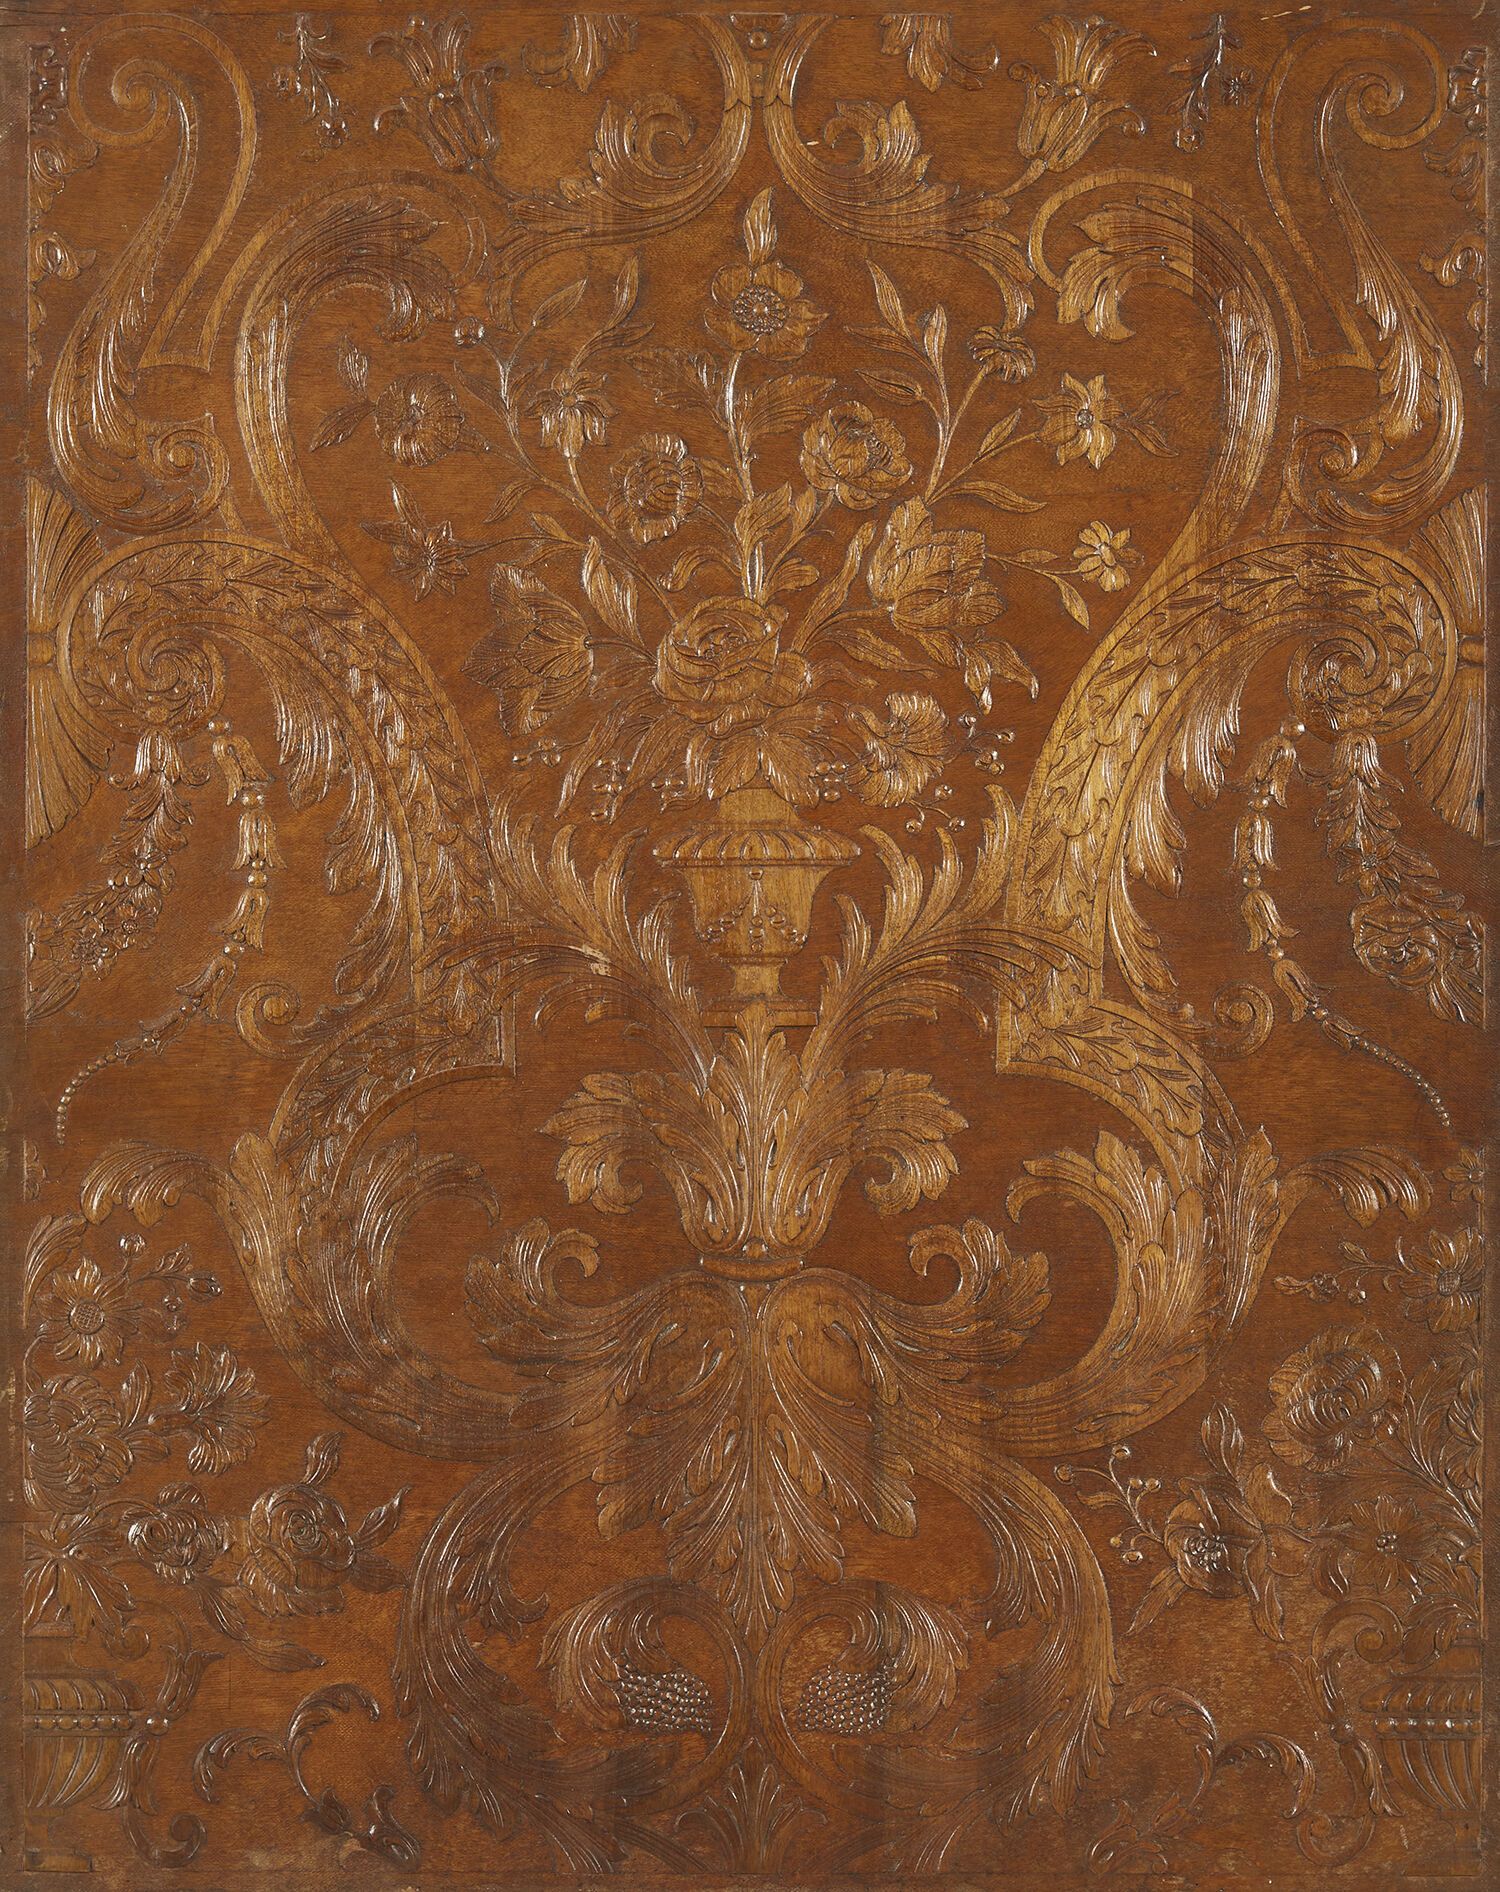 LOUIS XVI (DE STYLE) LOUIS XVI (STYLE)
Wood paneling decorated with leafy acanth&hellip;